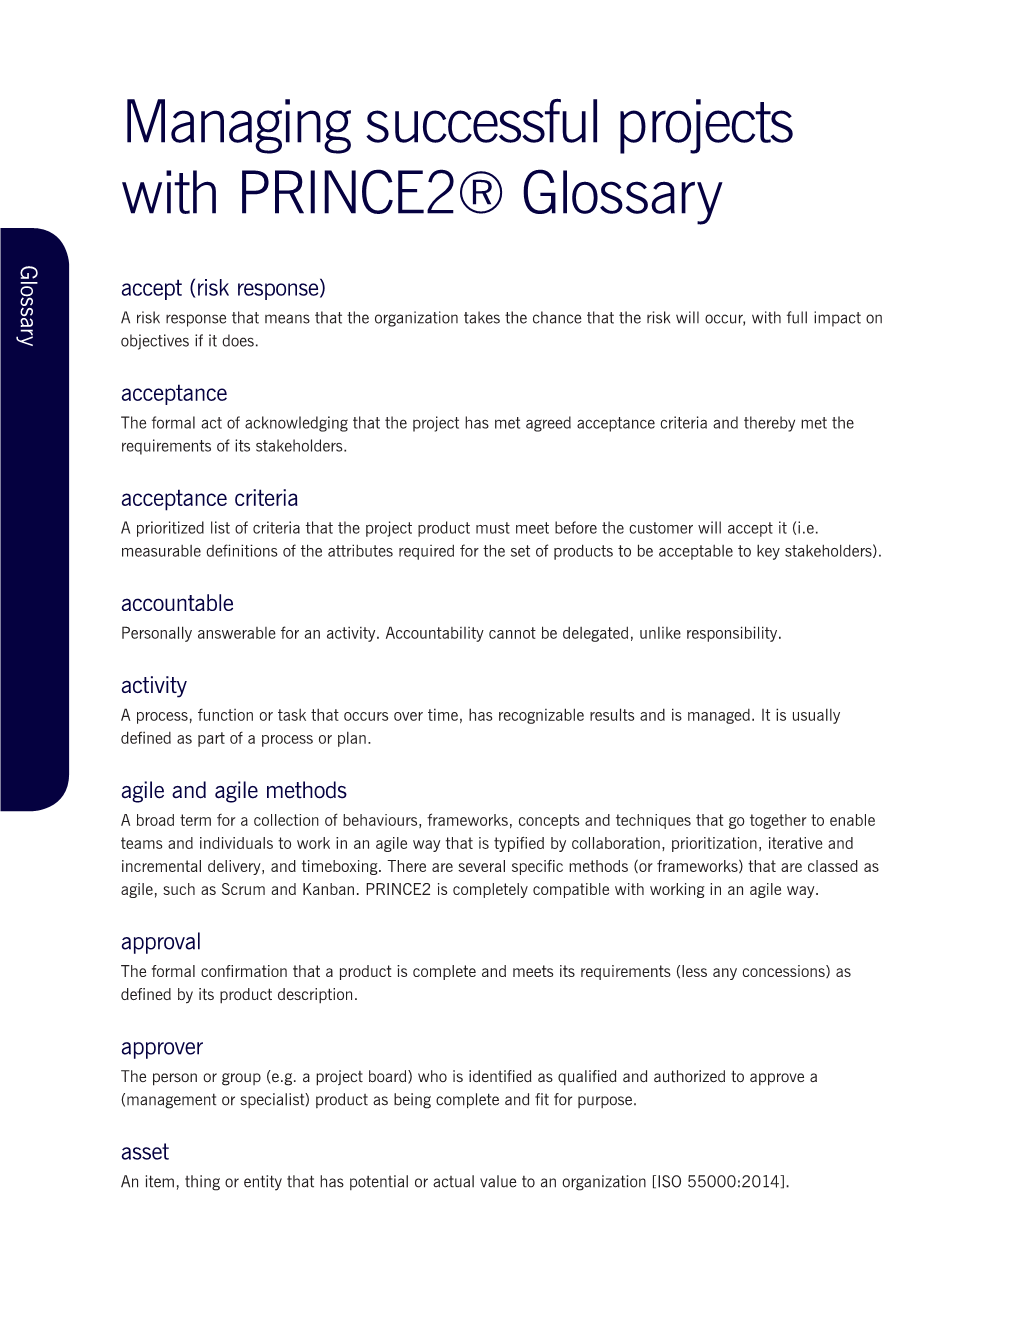 Managing Successful Projects with PRINCE2® Glossary